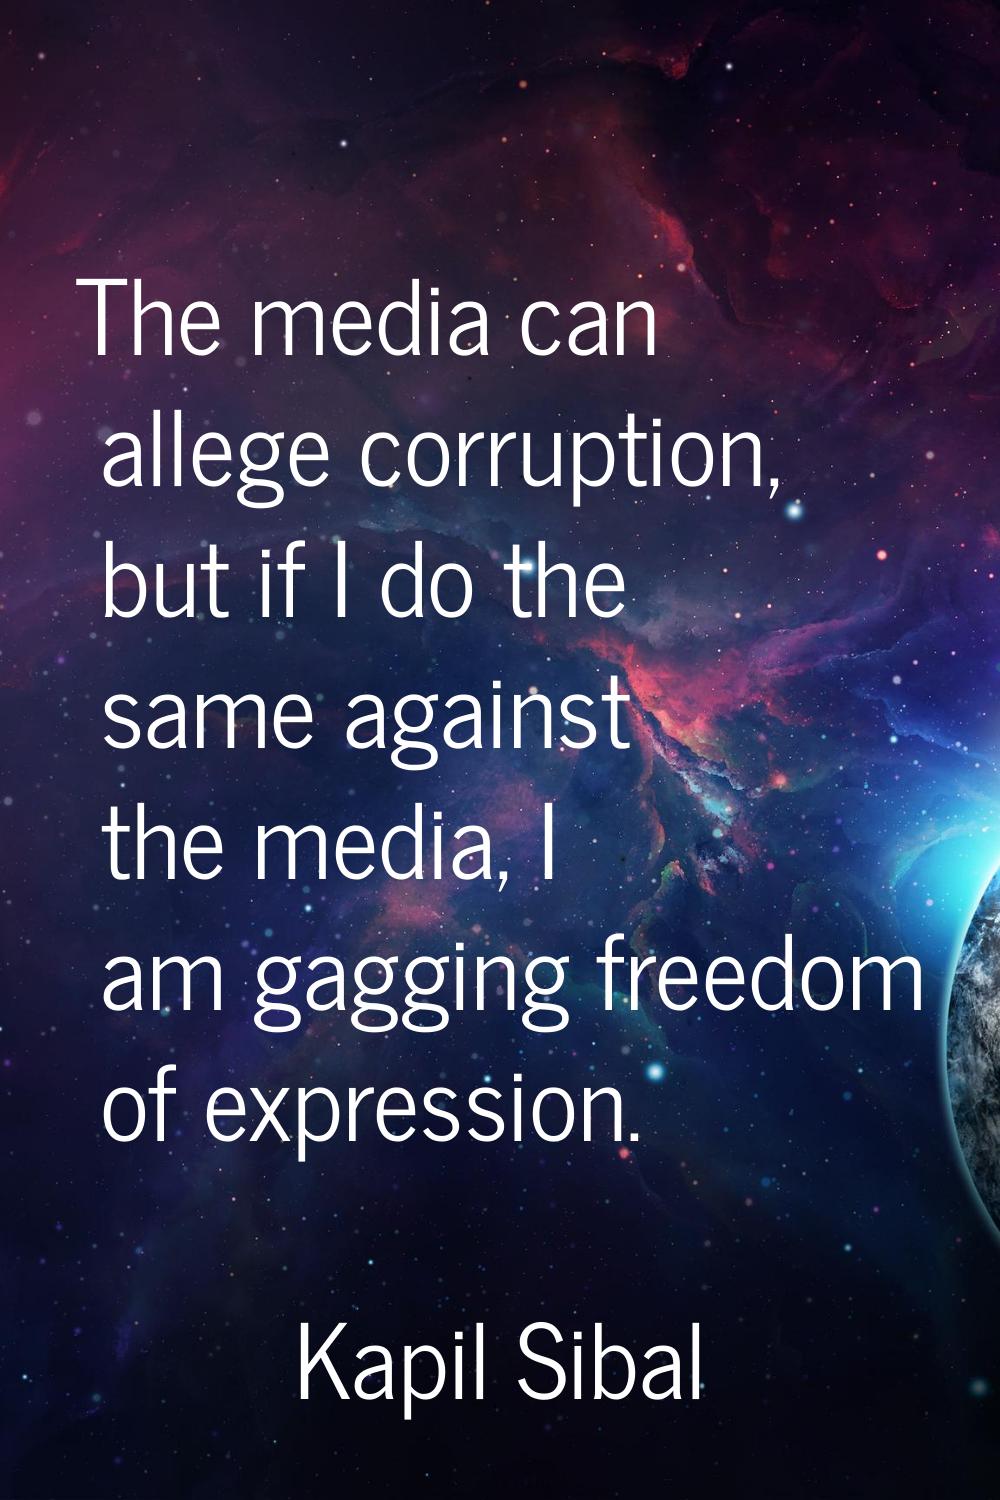 The media can allege corruption, but if I do the same against the media, I am gagging freedom of ex